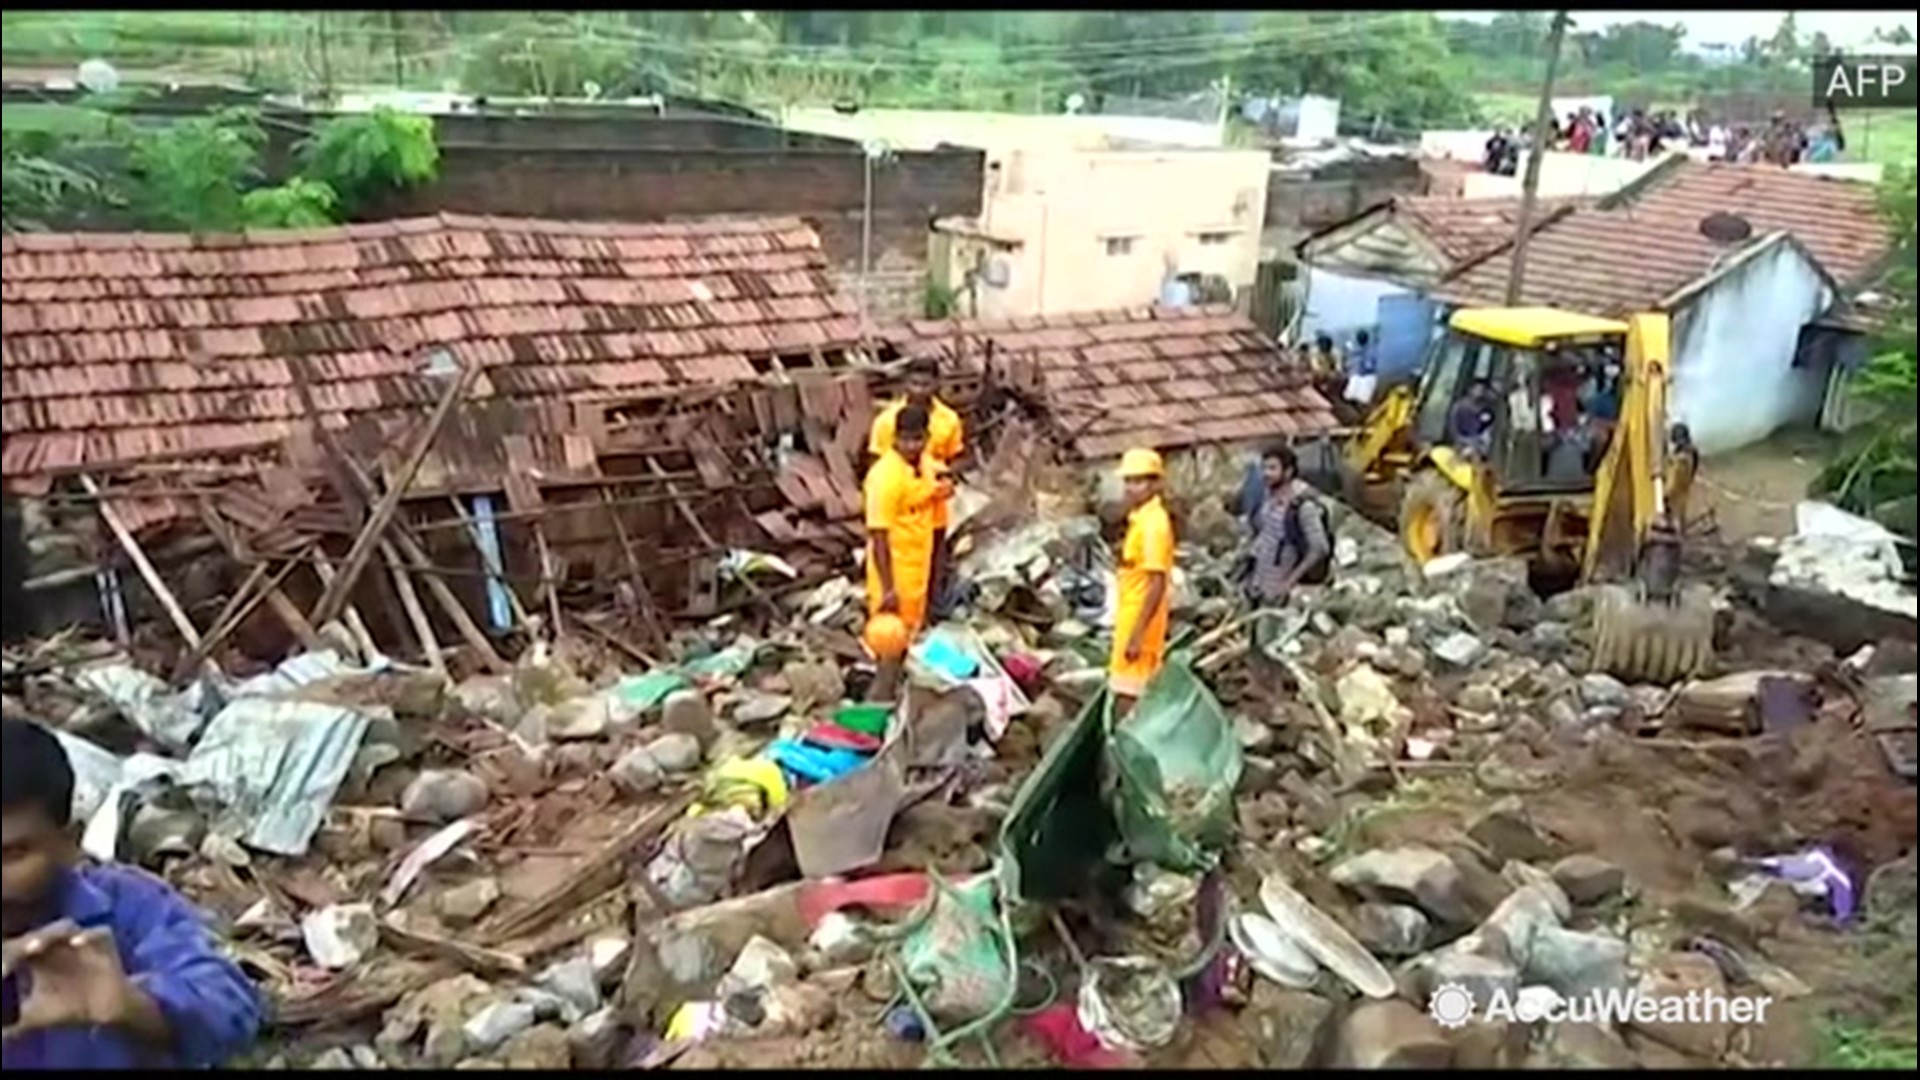 At least 17 people were killed in Nadur, India, after heavy rain caused a wall to collapse on their homes in the middle of the night on Dec. 2. Police say the residents were sleeping at the time and that they were buried alive.